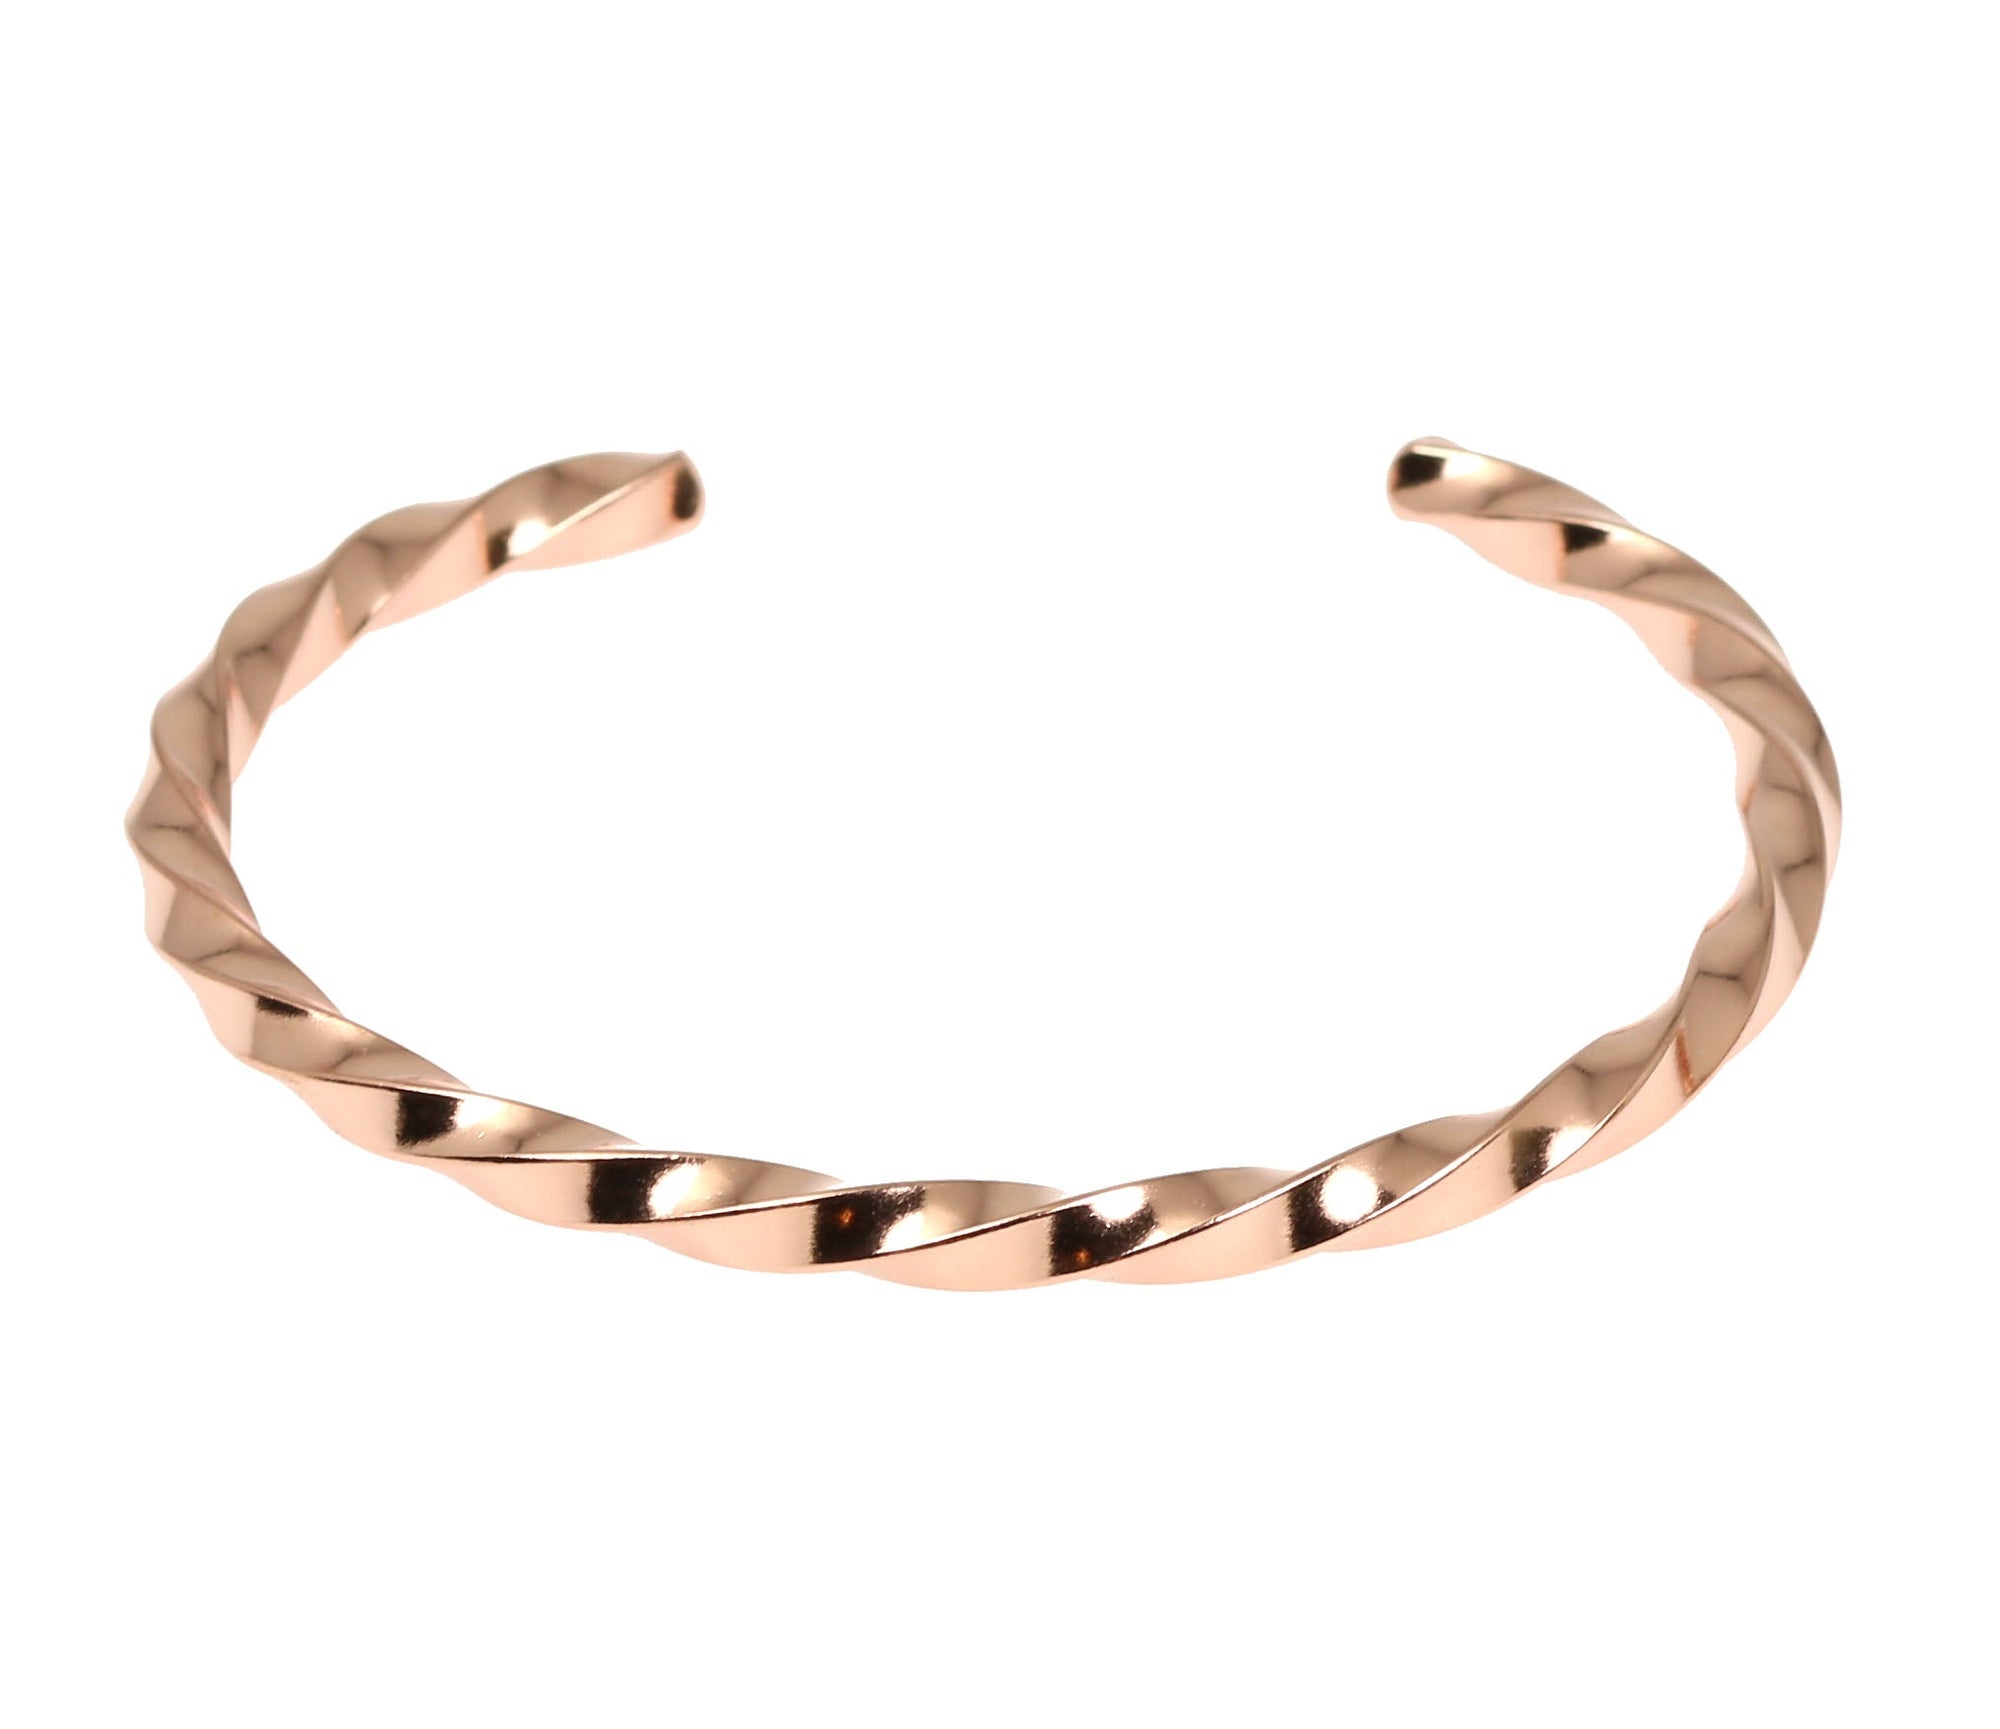 Detail of Twisted Copper Cuff Bracelet